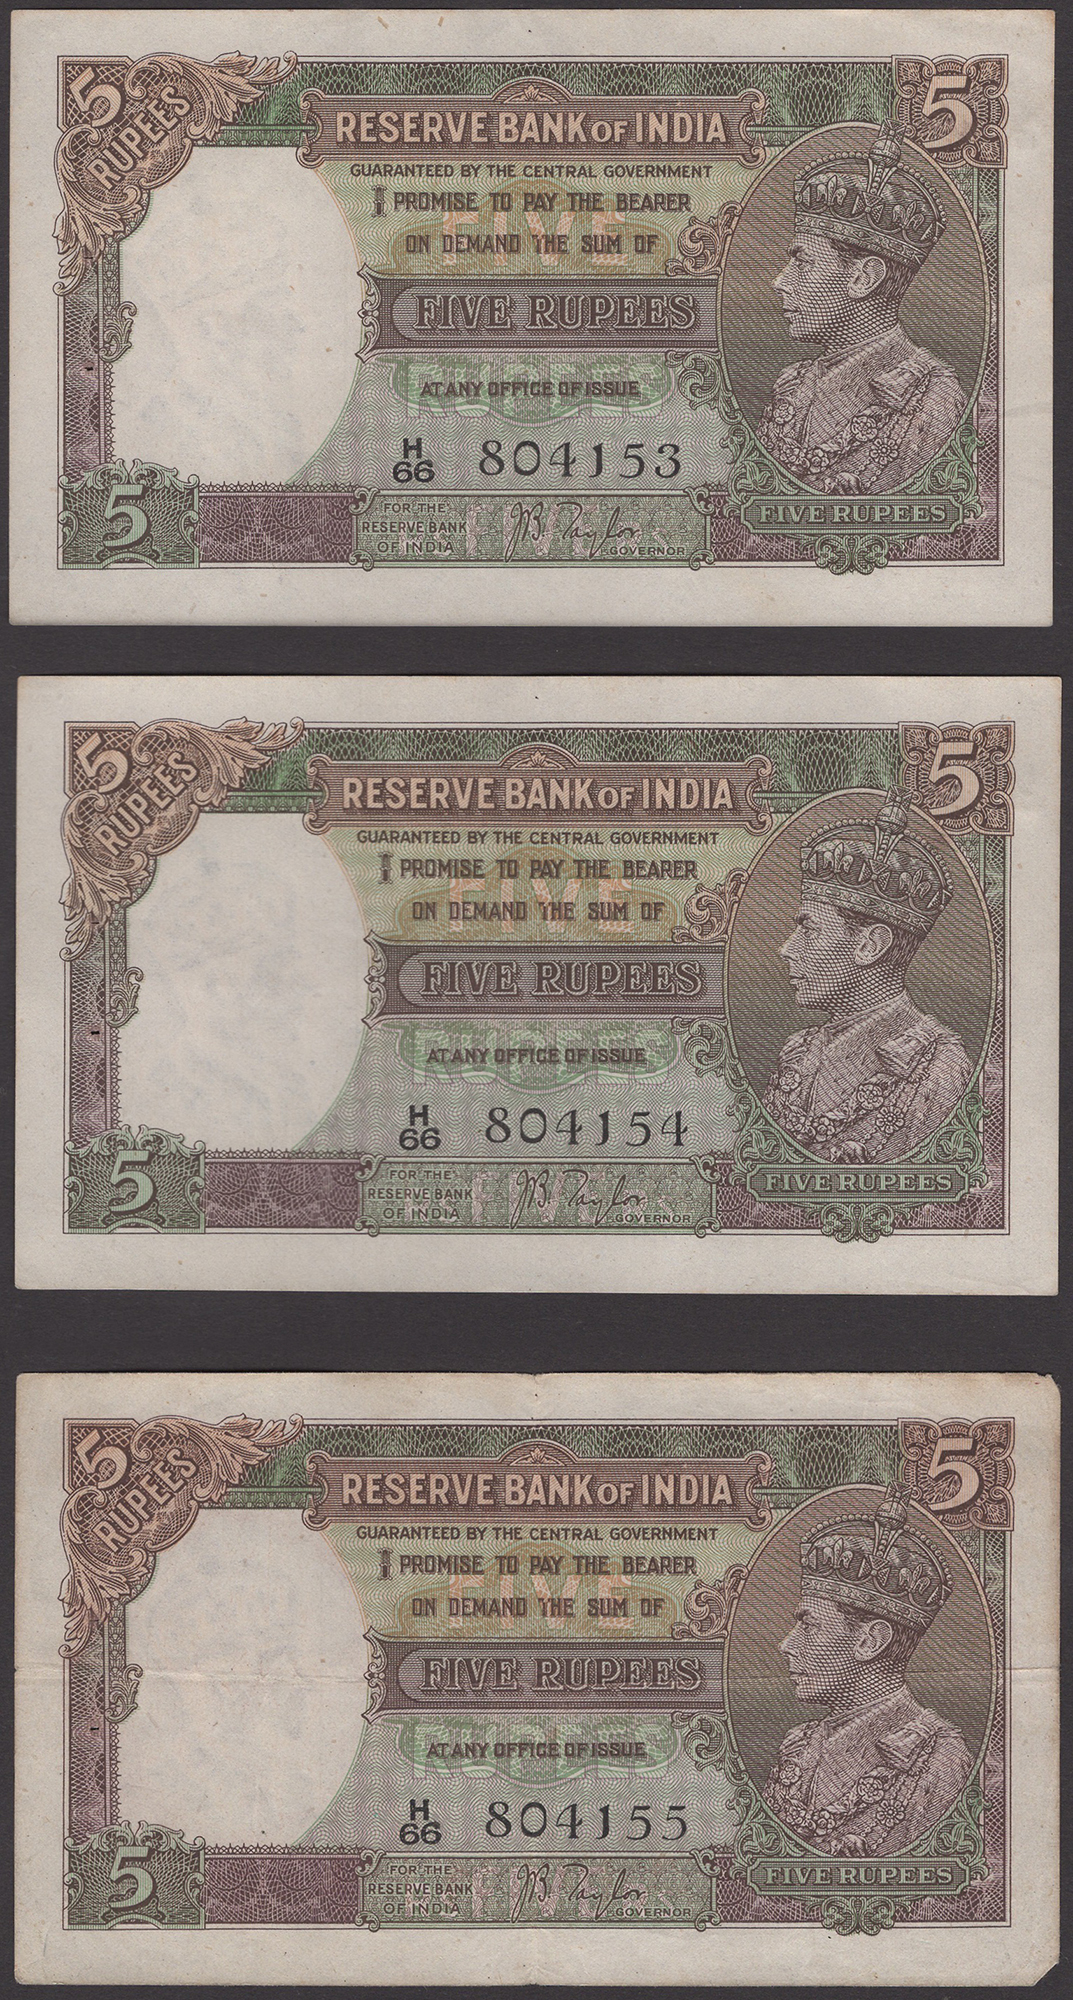 Reserve Bank of India, 5 Rupees (7), ND (1937), consecutive serial numbers H/66 804150-56,... - Image 3 of 6